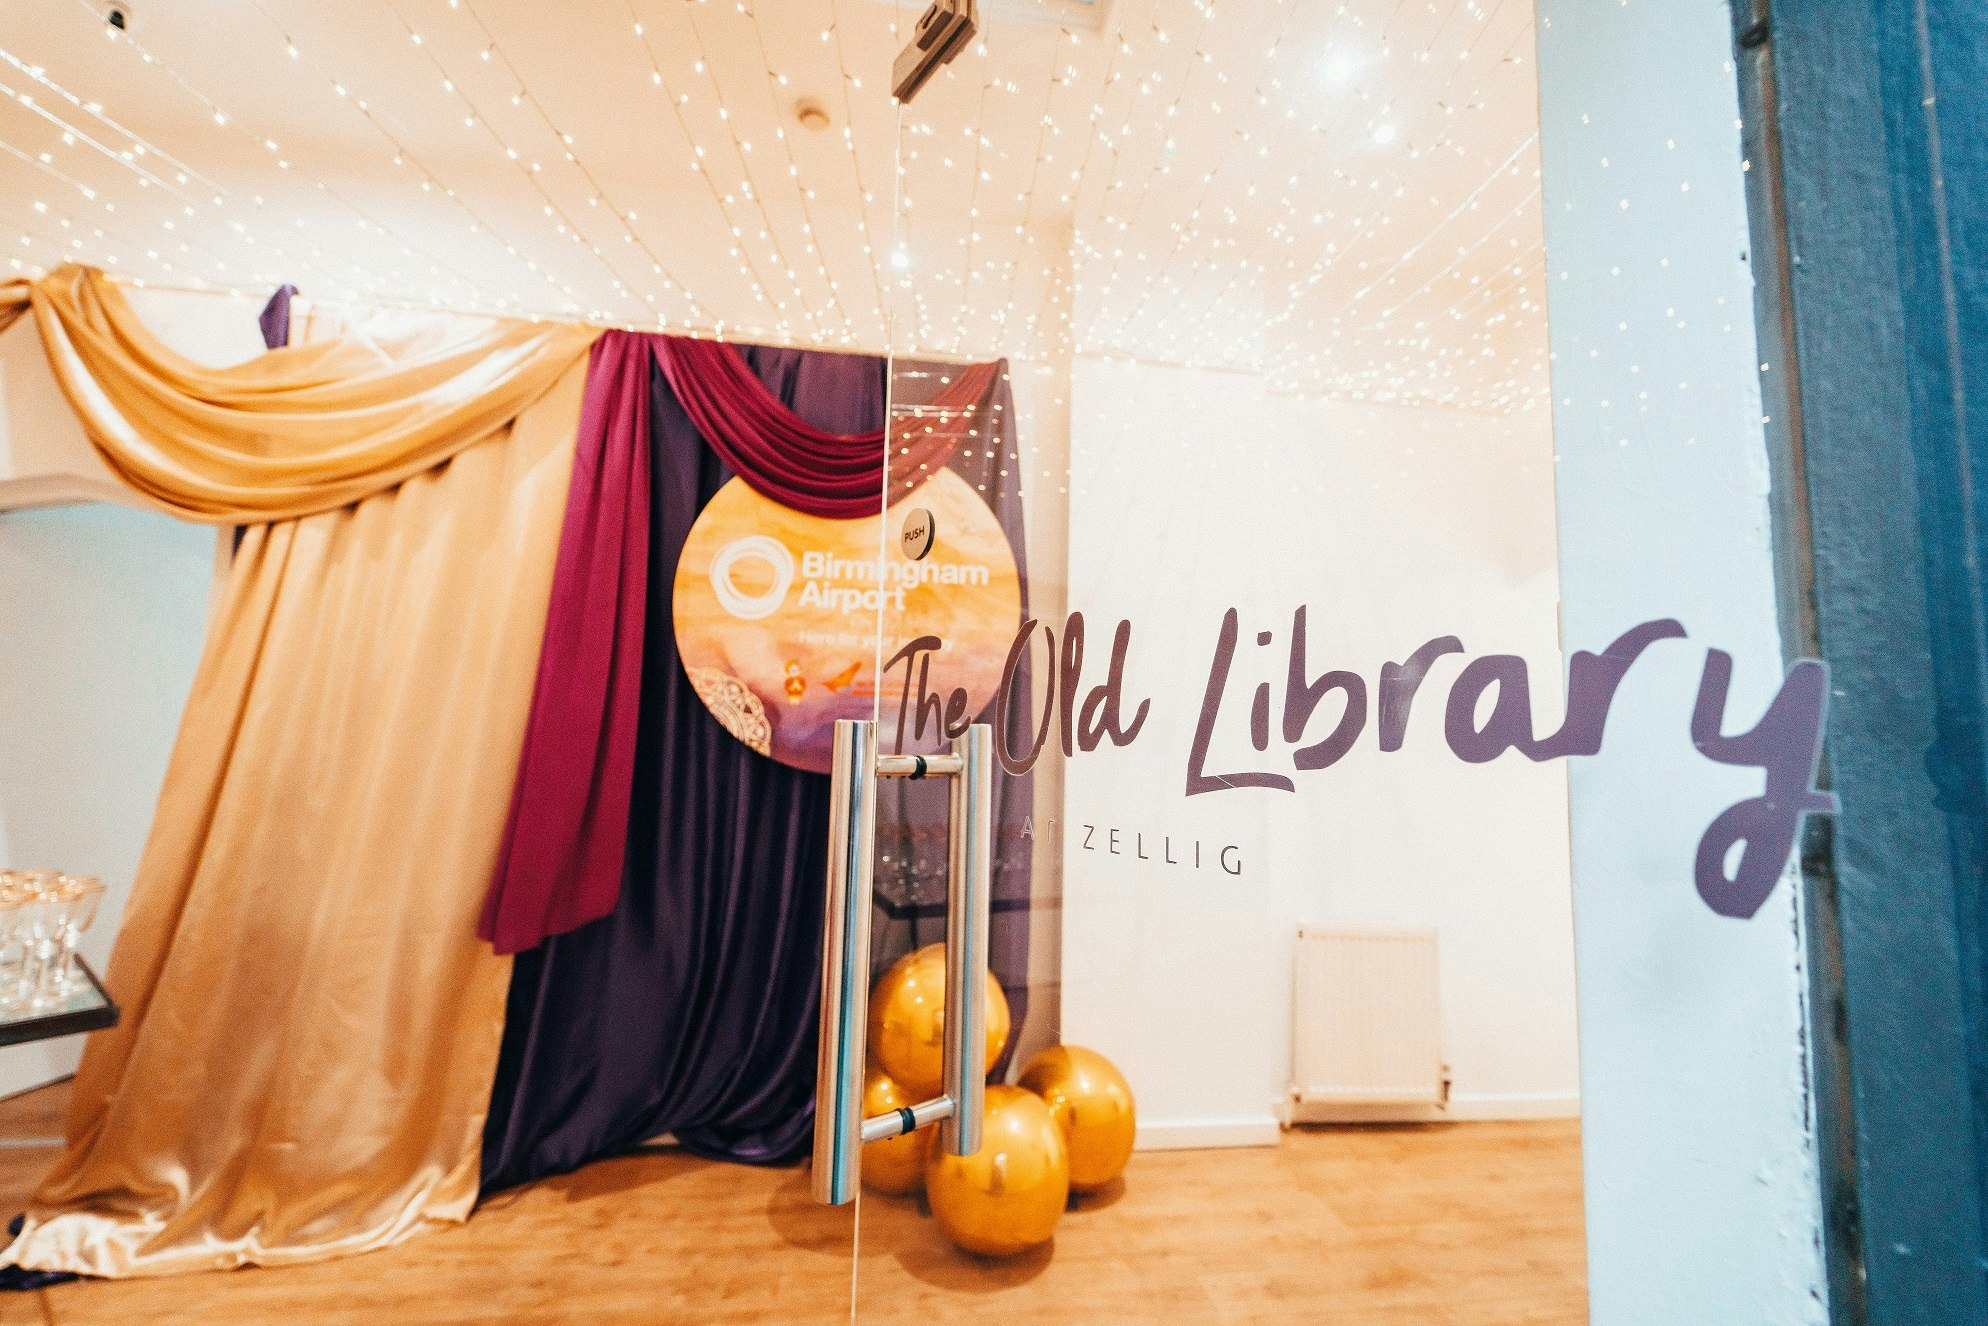 Birthday Party Venues in Birmingham - The Old Library